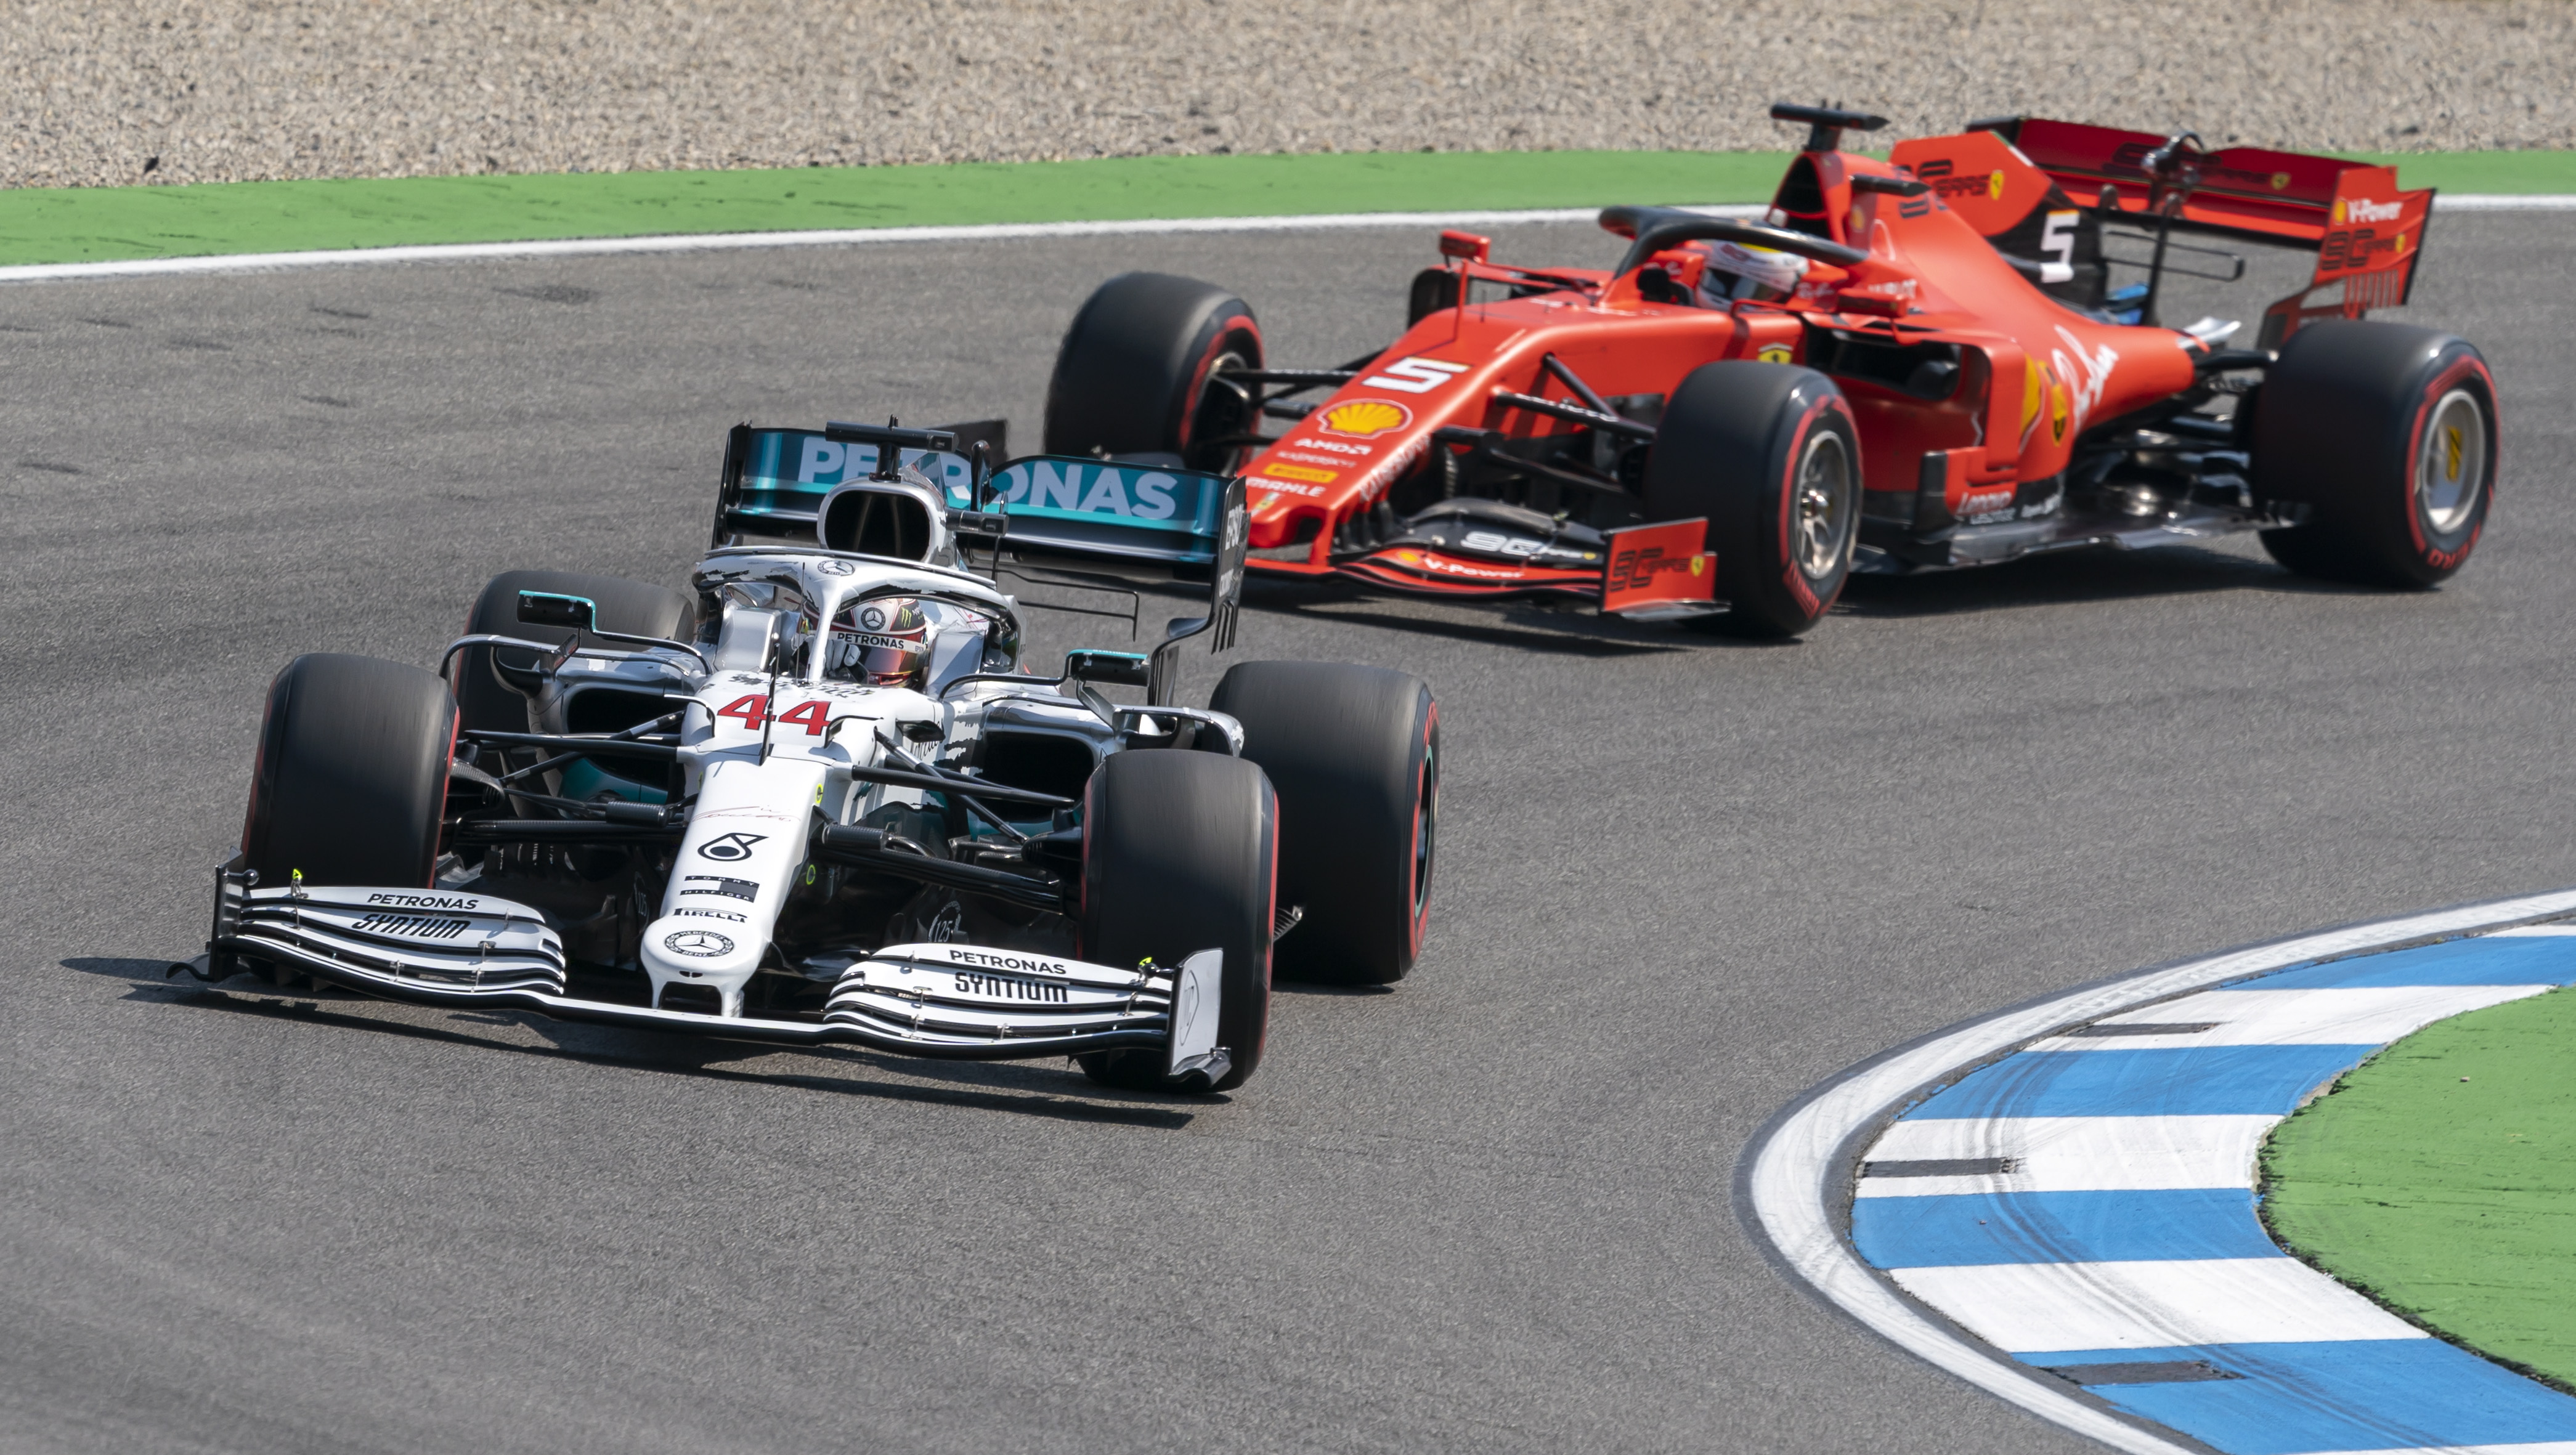 epa07741688 British Formula One driver Lewis Hamilton (L) of Mercedes AMG GP and German Formula One driver Sebastian Vettel (R) of Scuderia Ferrari in action during the first practice session of the 2019 Formula One Grand Prix of Germany at Hockenheim Ring circuit in Hockenheim, Germany, 26 July 2019. The 2019 Formula One Grand Prix of Germany will take place on 28 July.  EPA/RONALD WITTEK